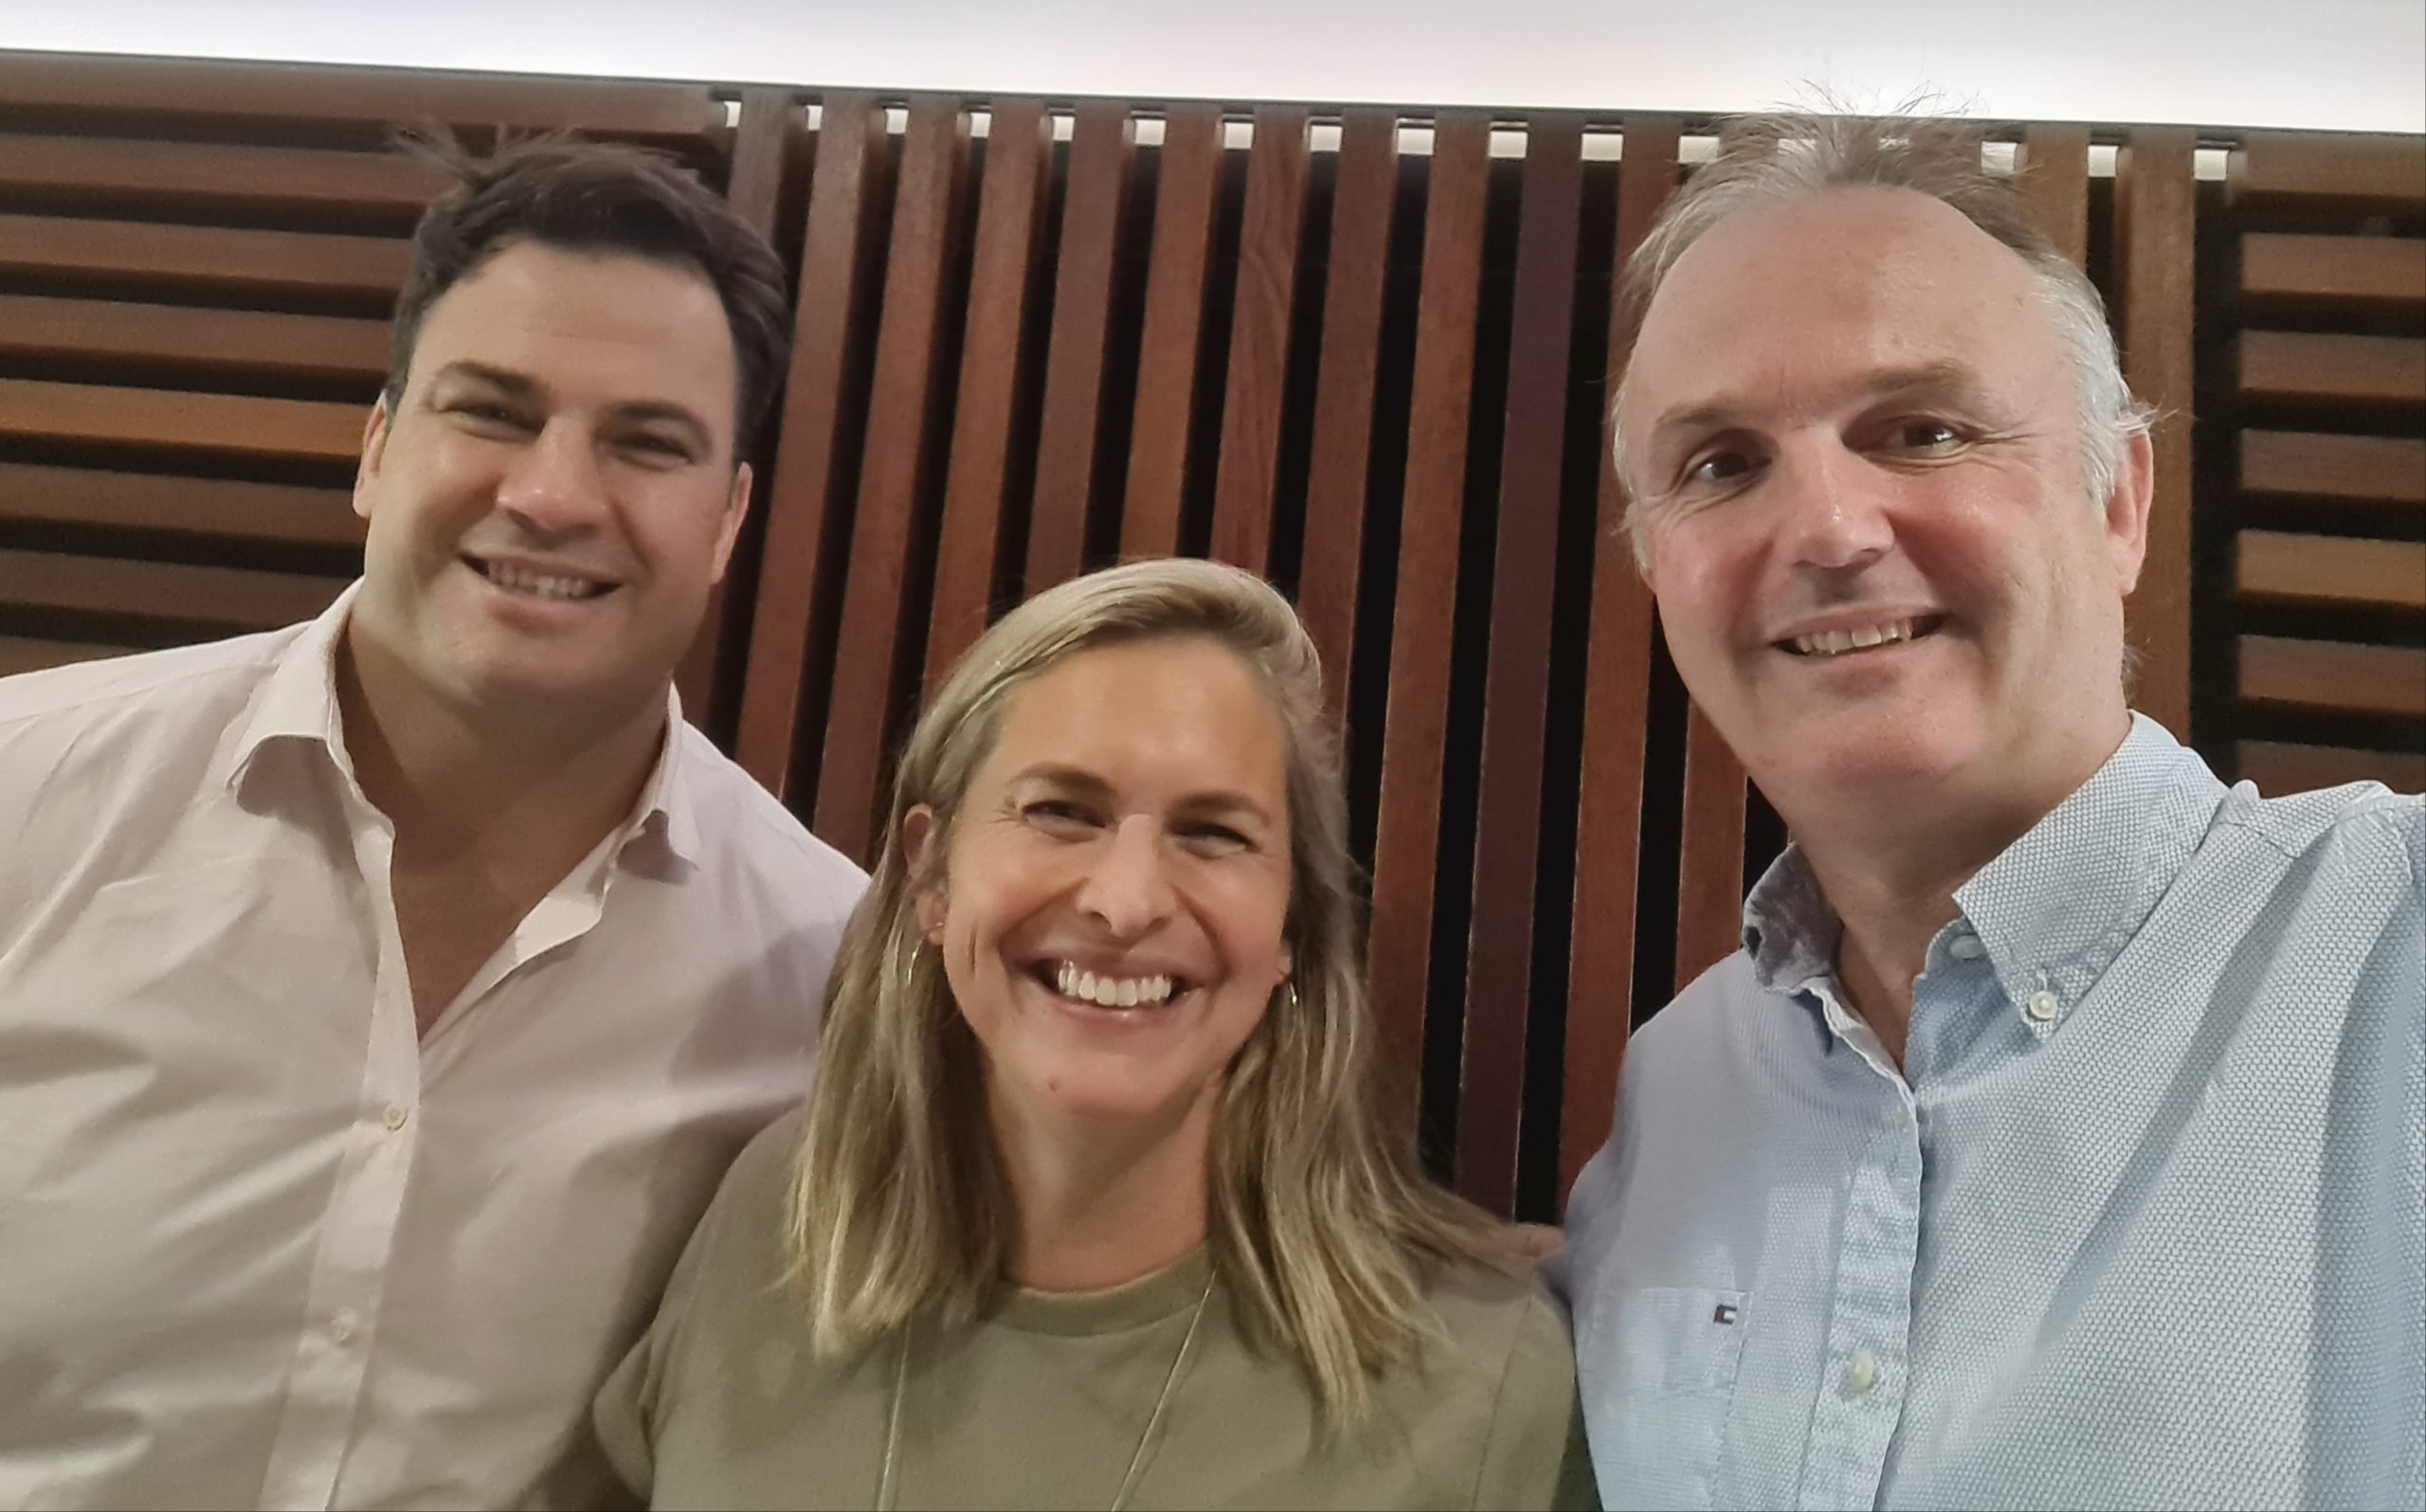 What’s better than connecting your client to an Olympic Gold Medalist? Connecting them to a Triple Olympic Gold Medalist Libby Trickett won swimming gold at three consecutive Olympics and will soon team up with former Queensland State of Origin star David Shillington Wellbeing Code